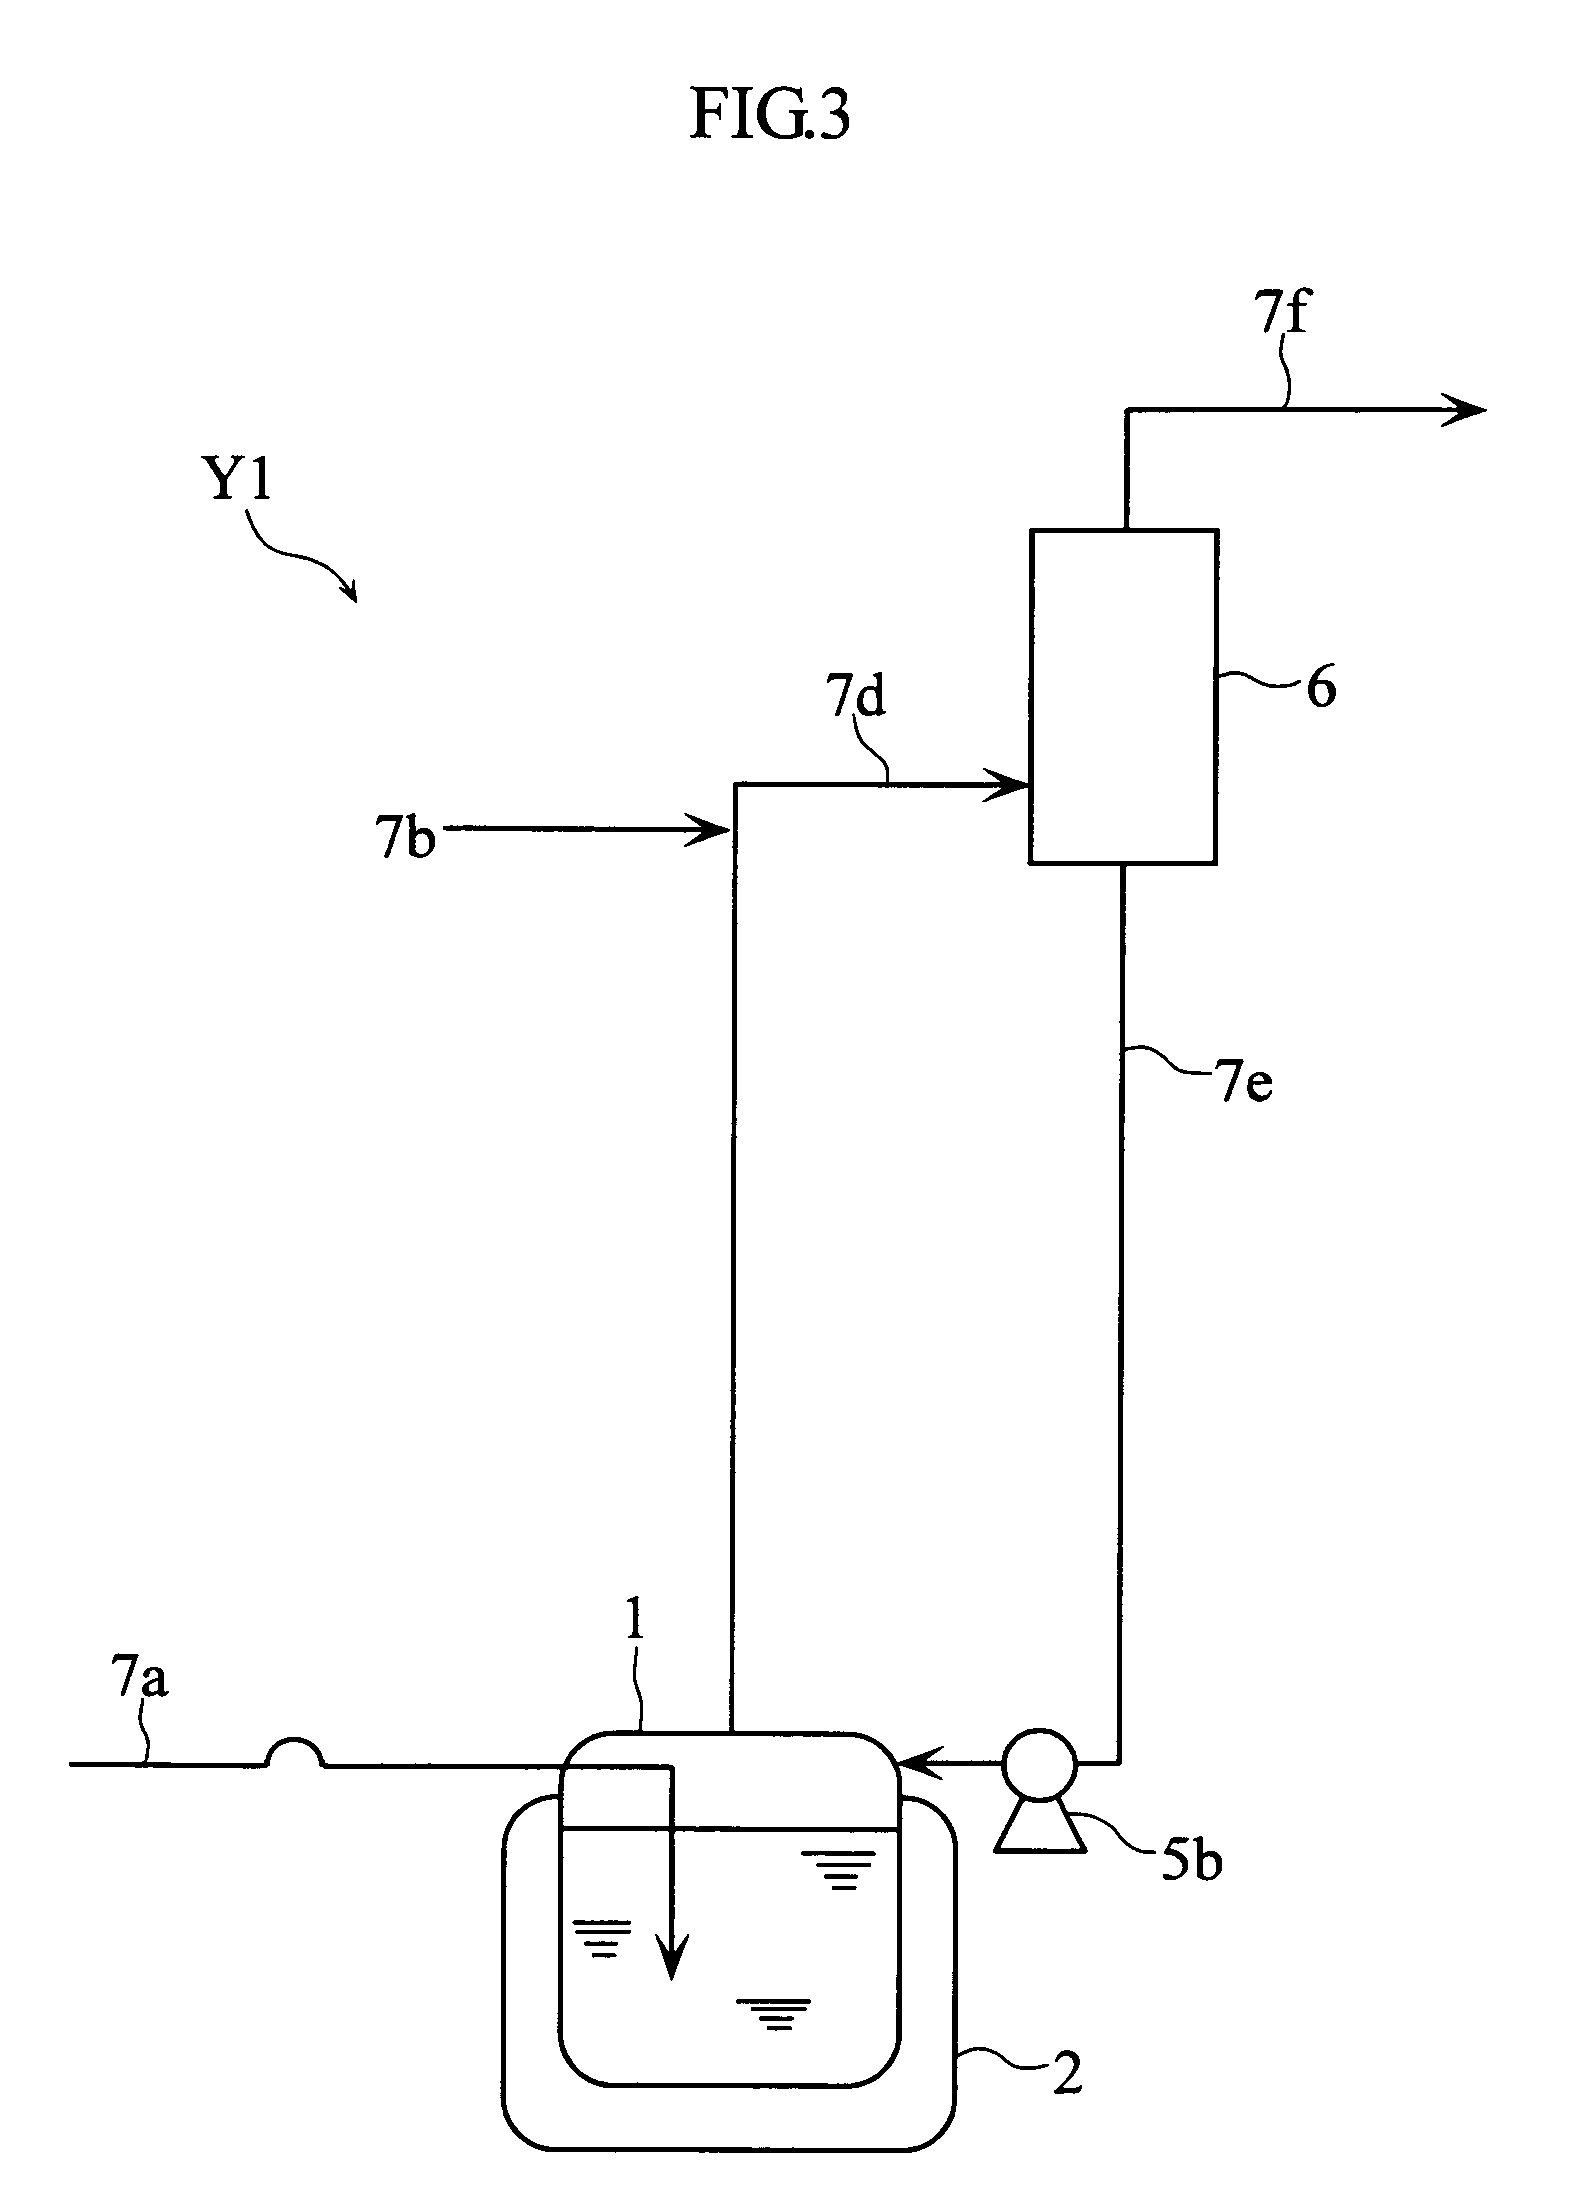 Method for purification of nitrogen oxide and apparatus for purification of nitrogen oxide